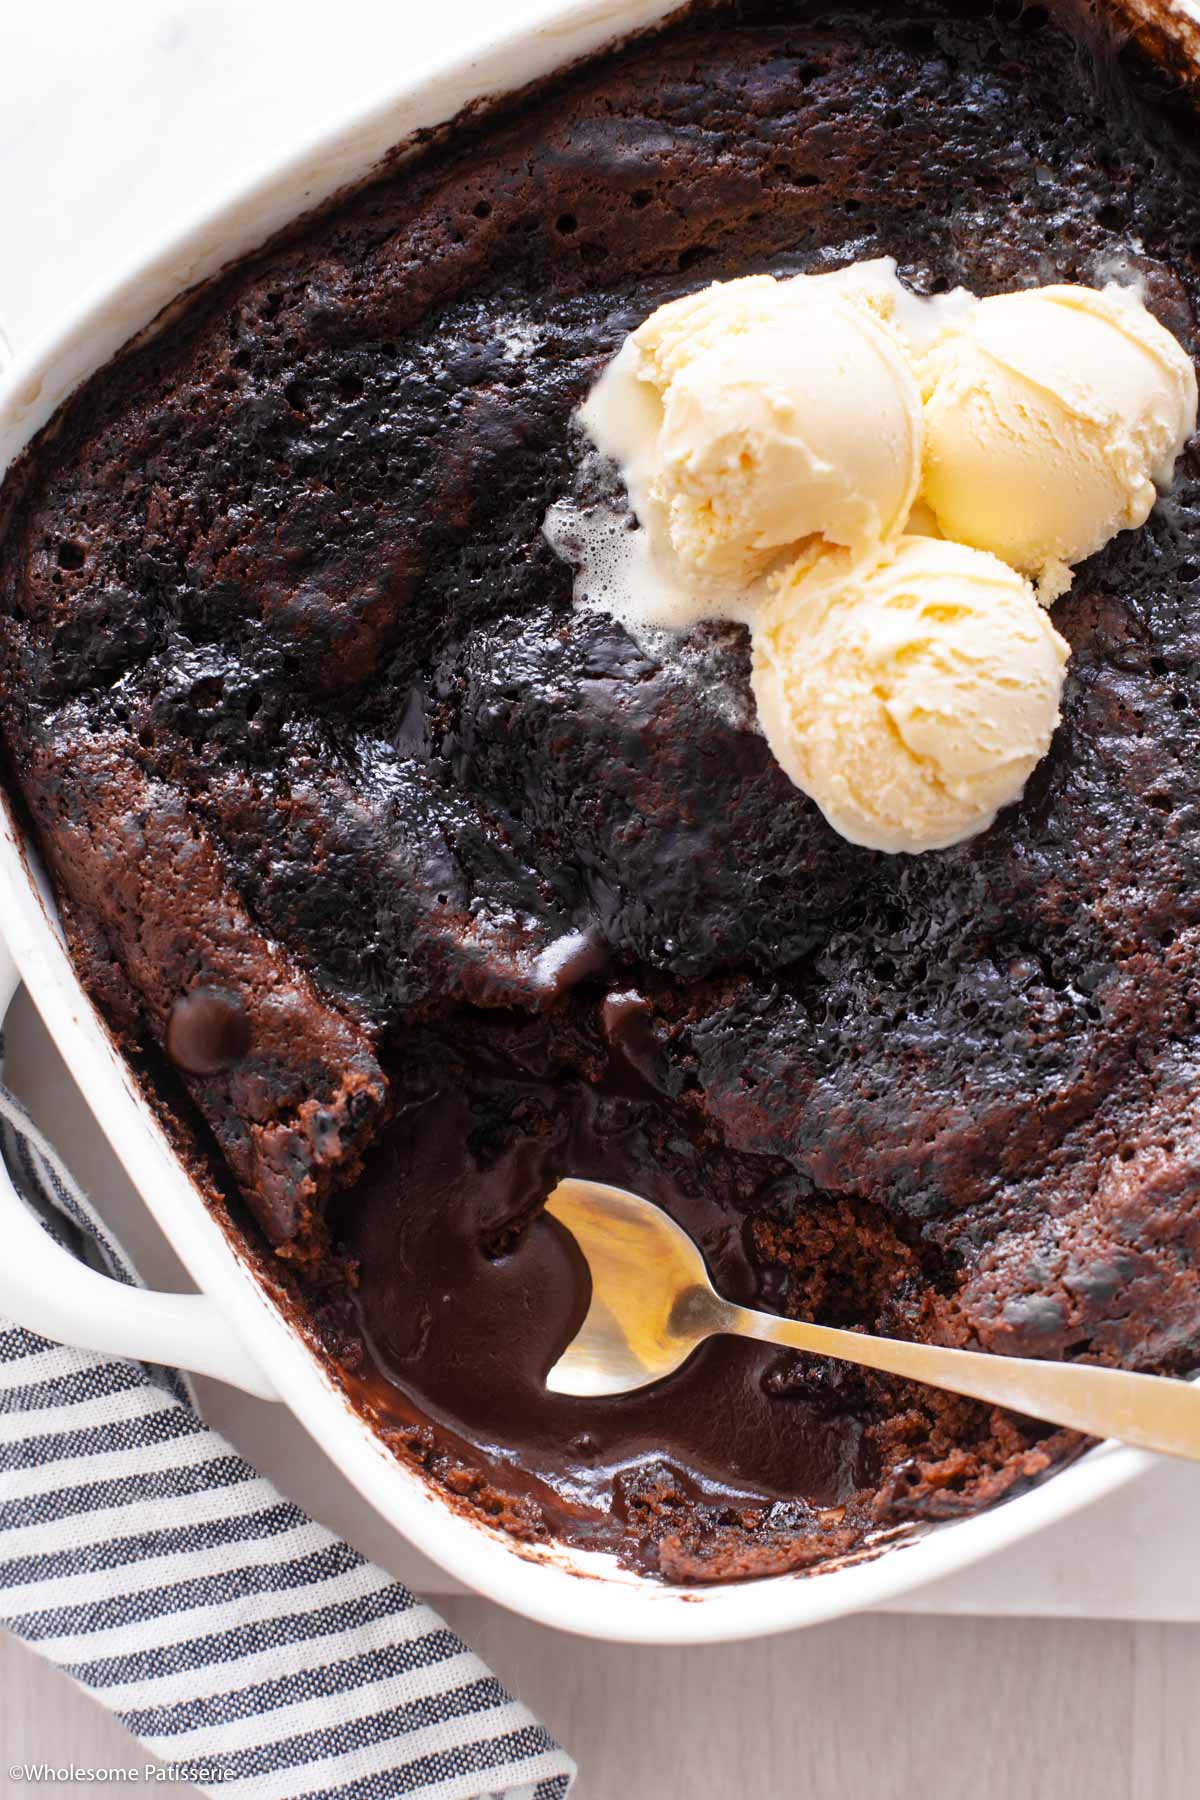 Overhead view of chocolate self saucing pudding in baking dish with gold spoon and scoops of vanilla ice cream